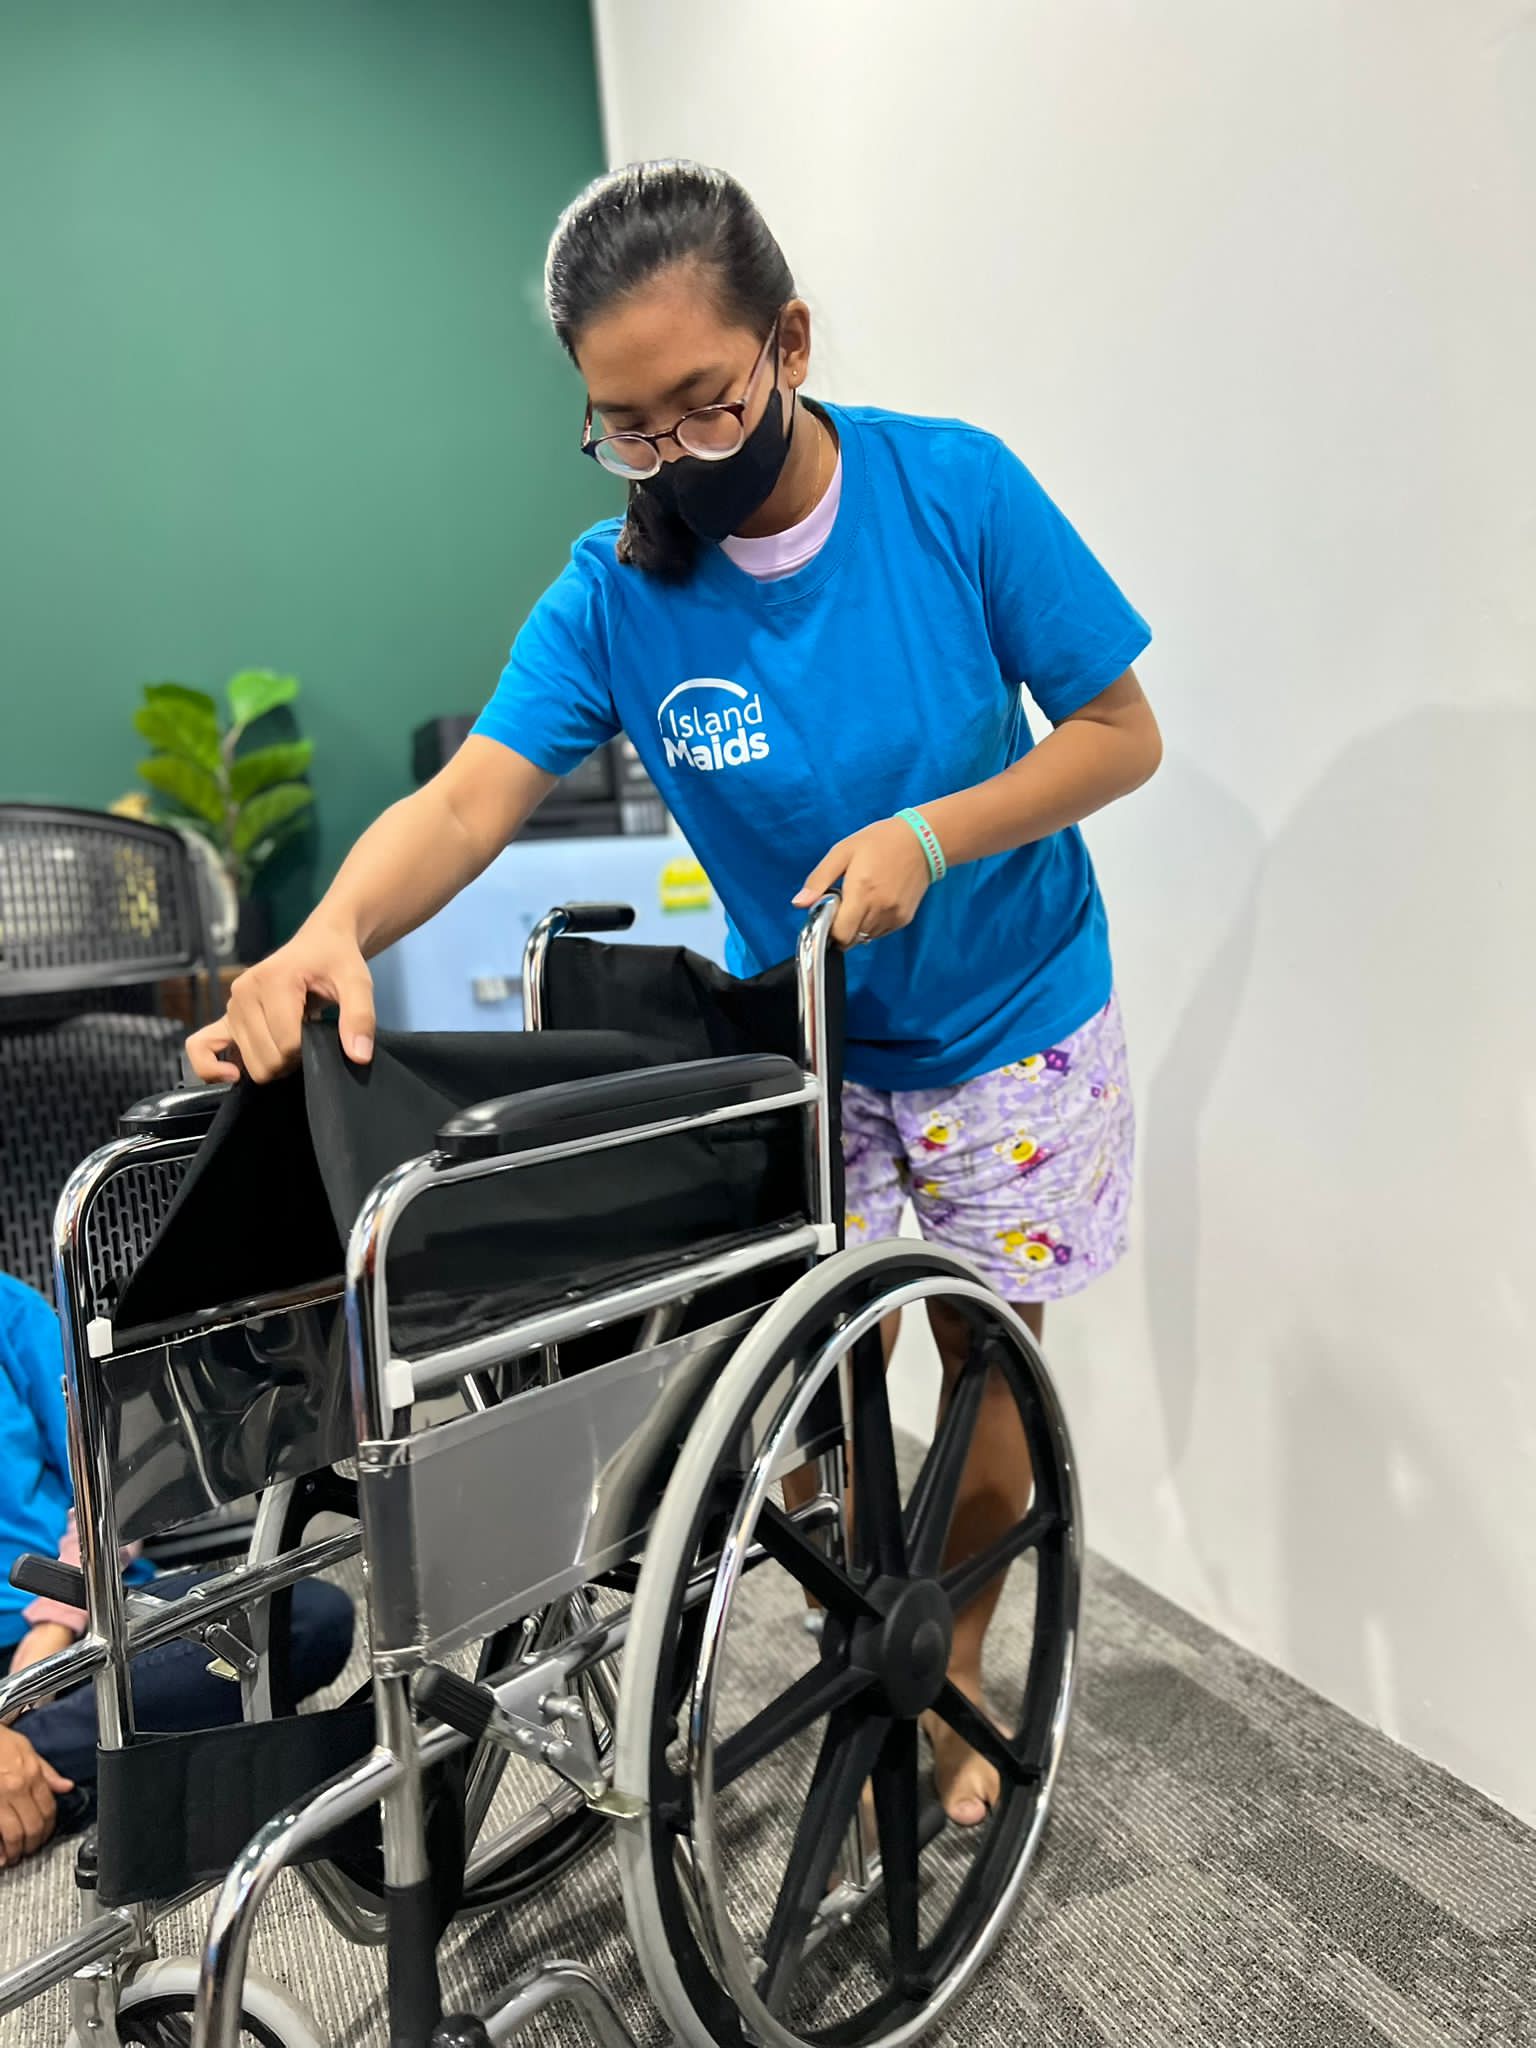 Elder Care Training in Singapore For Domestic Helpers